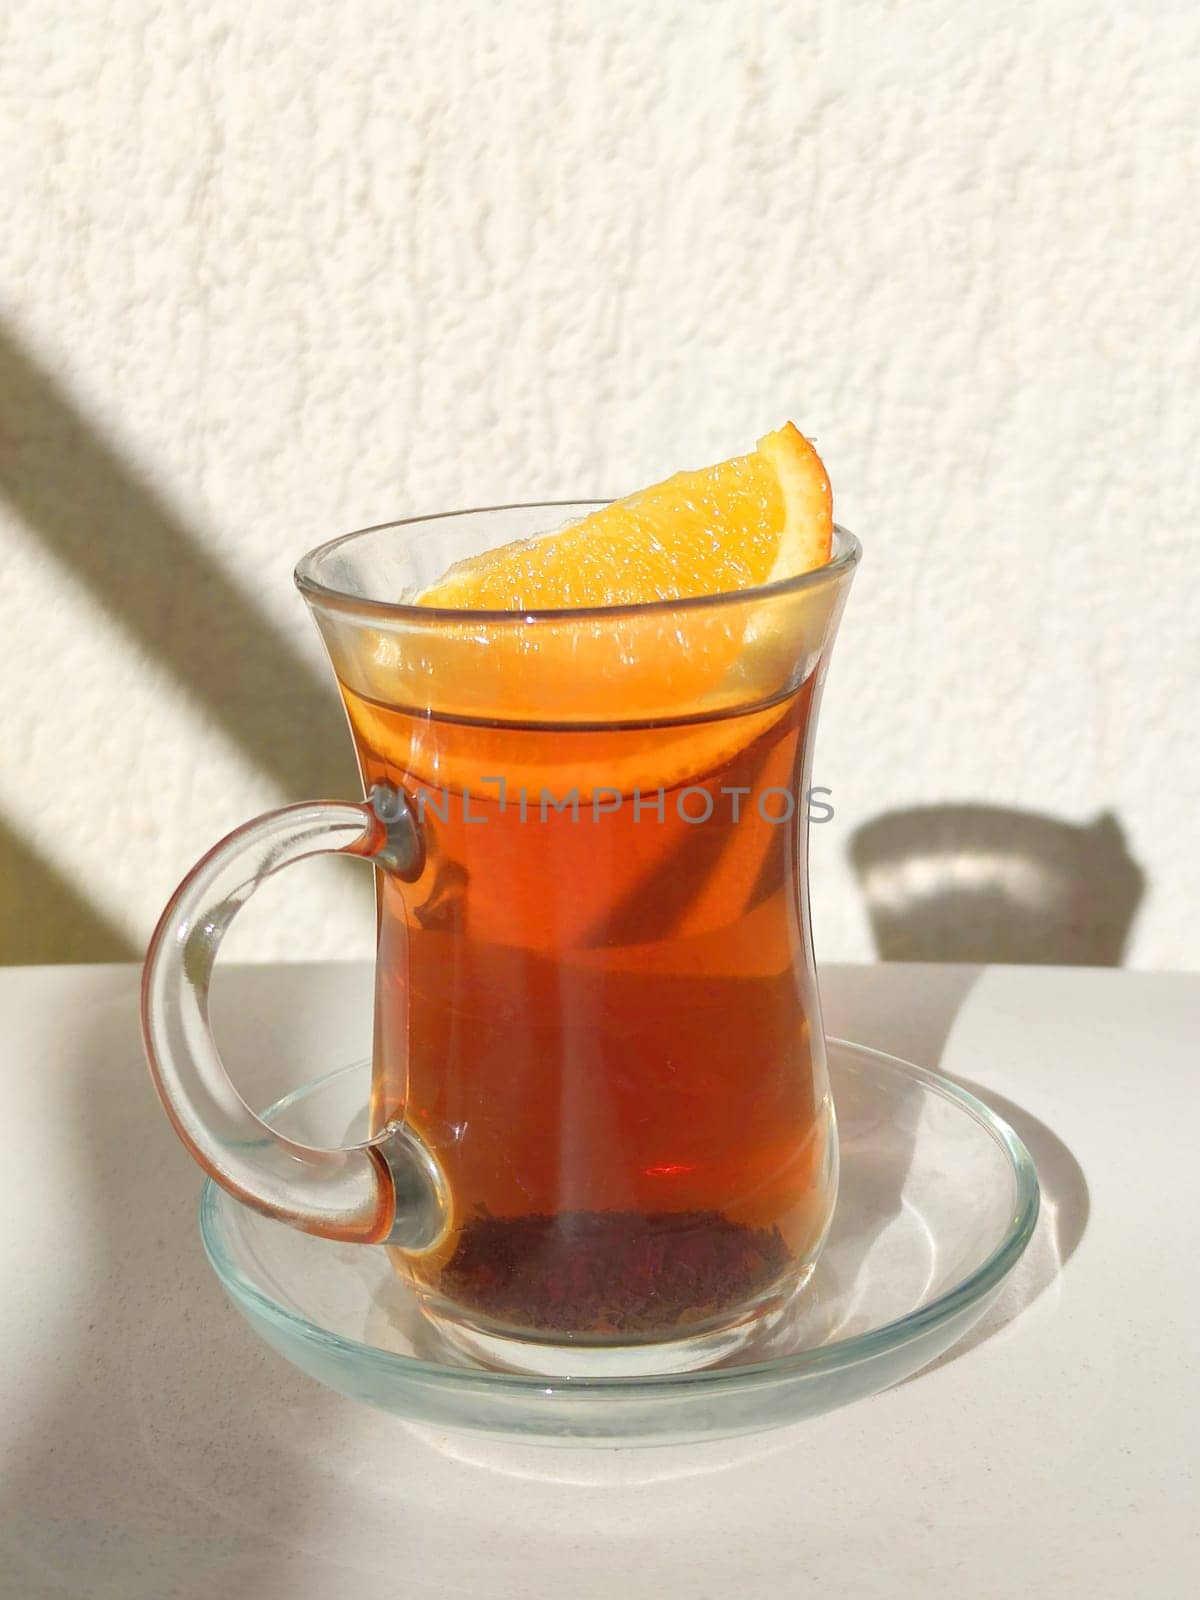 black tea with lemon in a glass cup and saucer in the sunlight by Annado